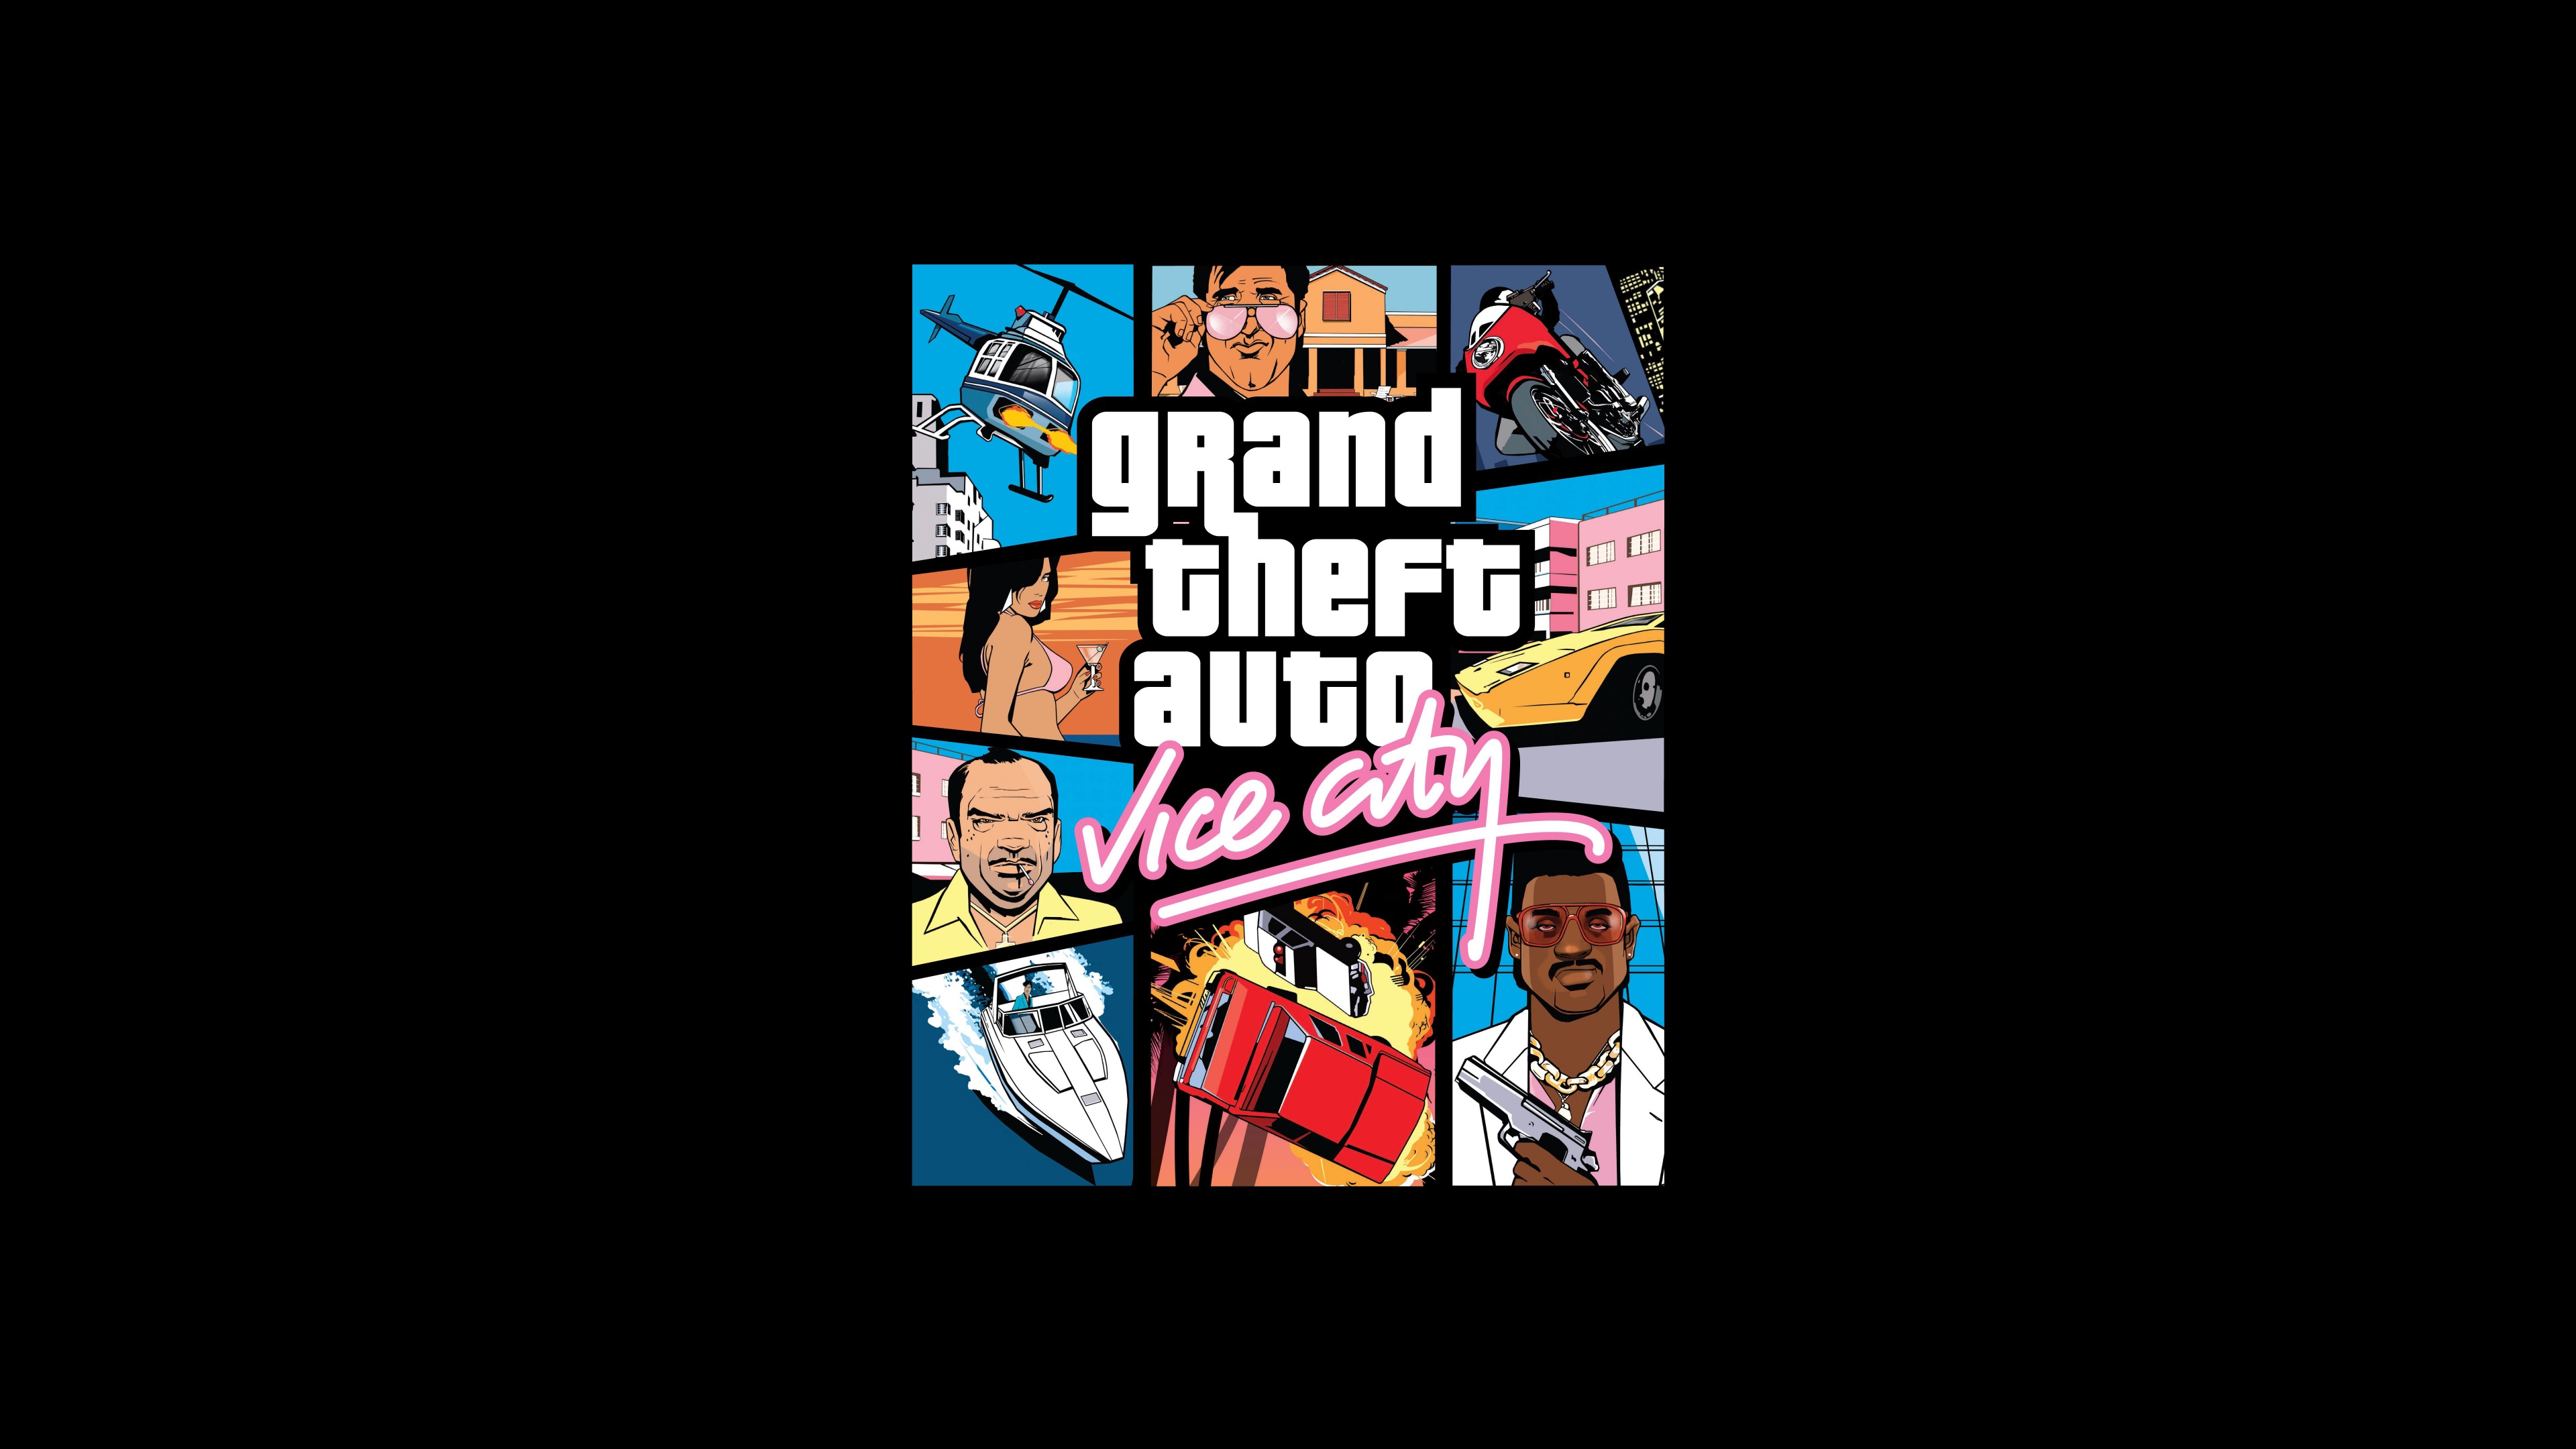 gta vice city wallpaper hd,pc game,games,movie,illustration,fictional  character (#254321) - WallpaperUse